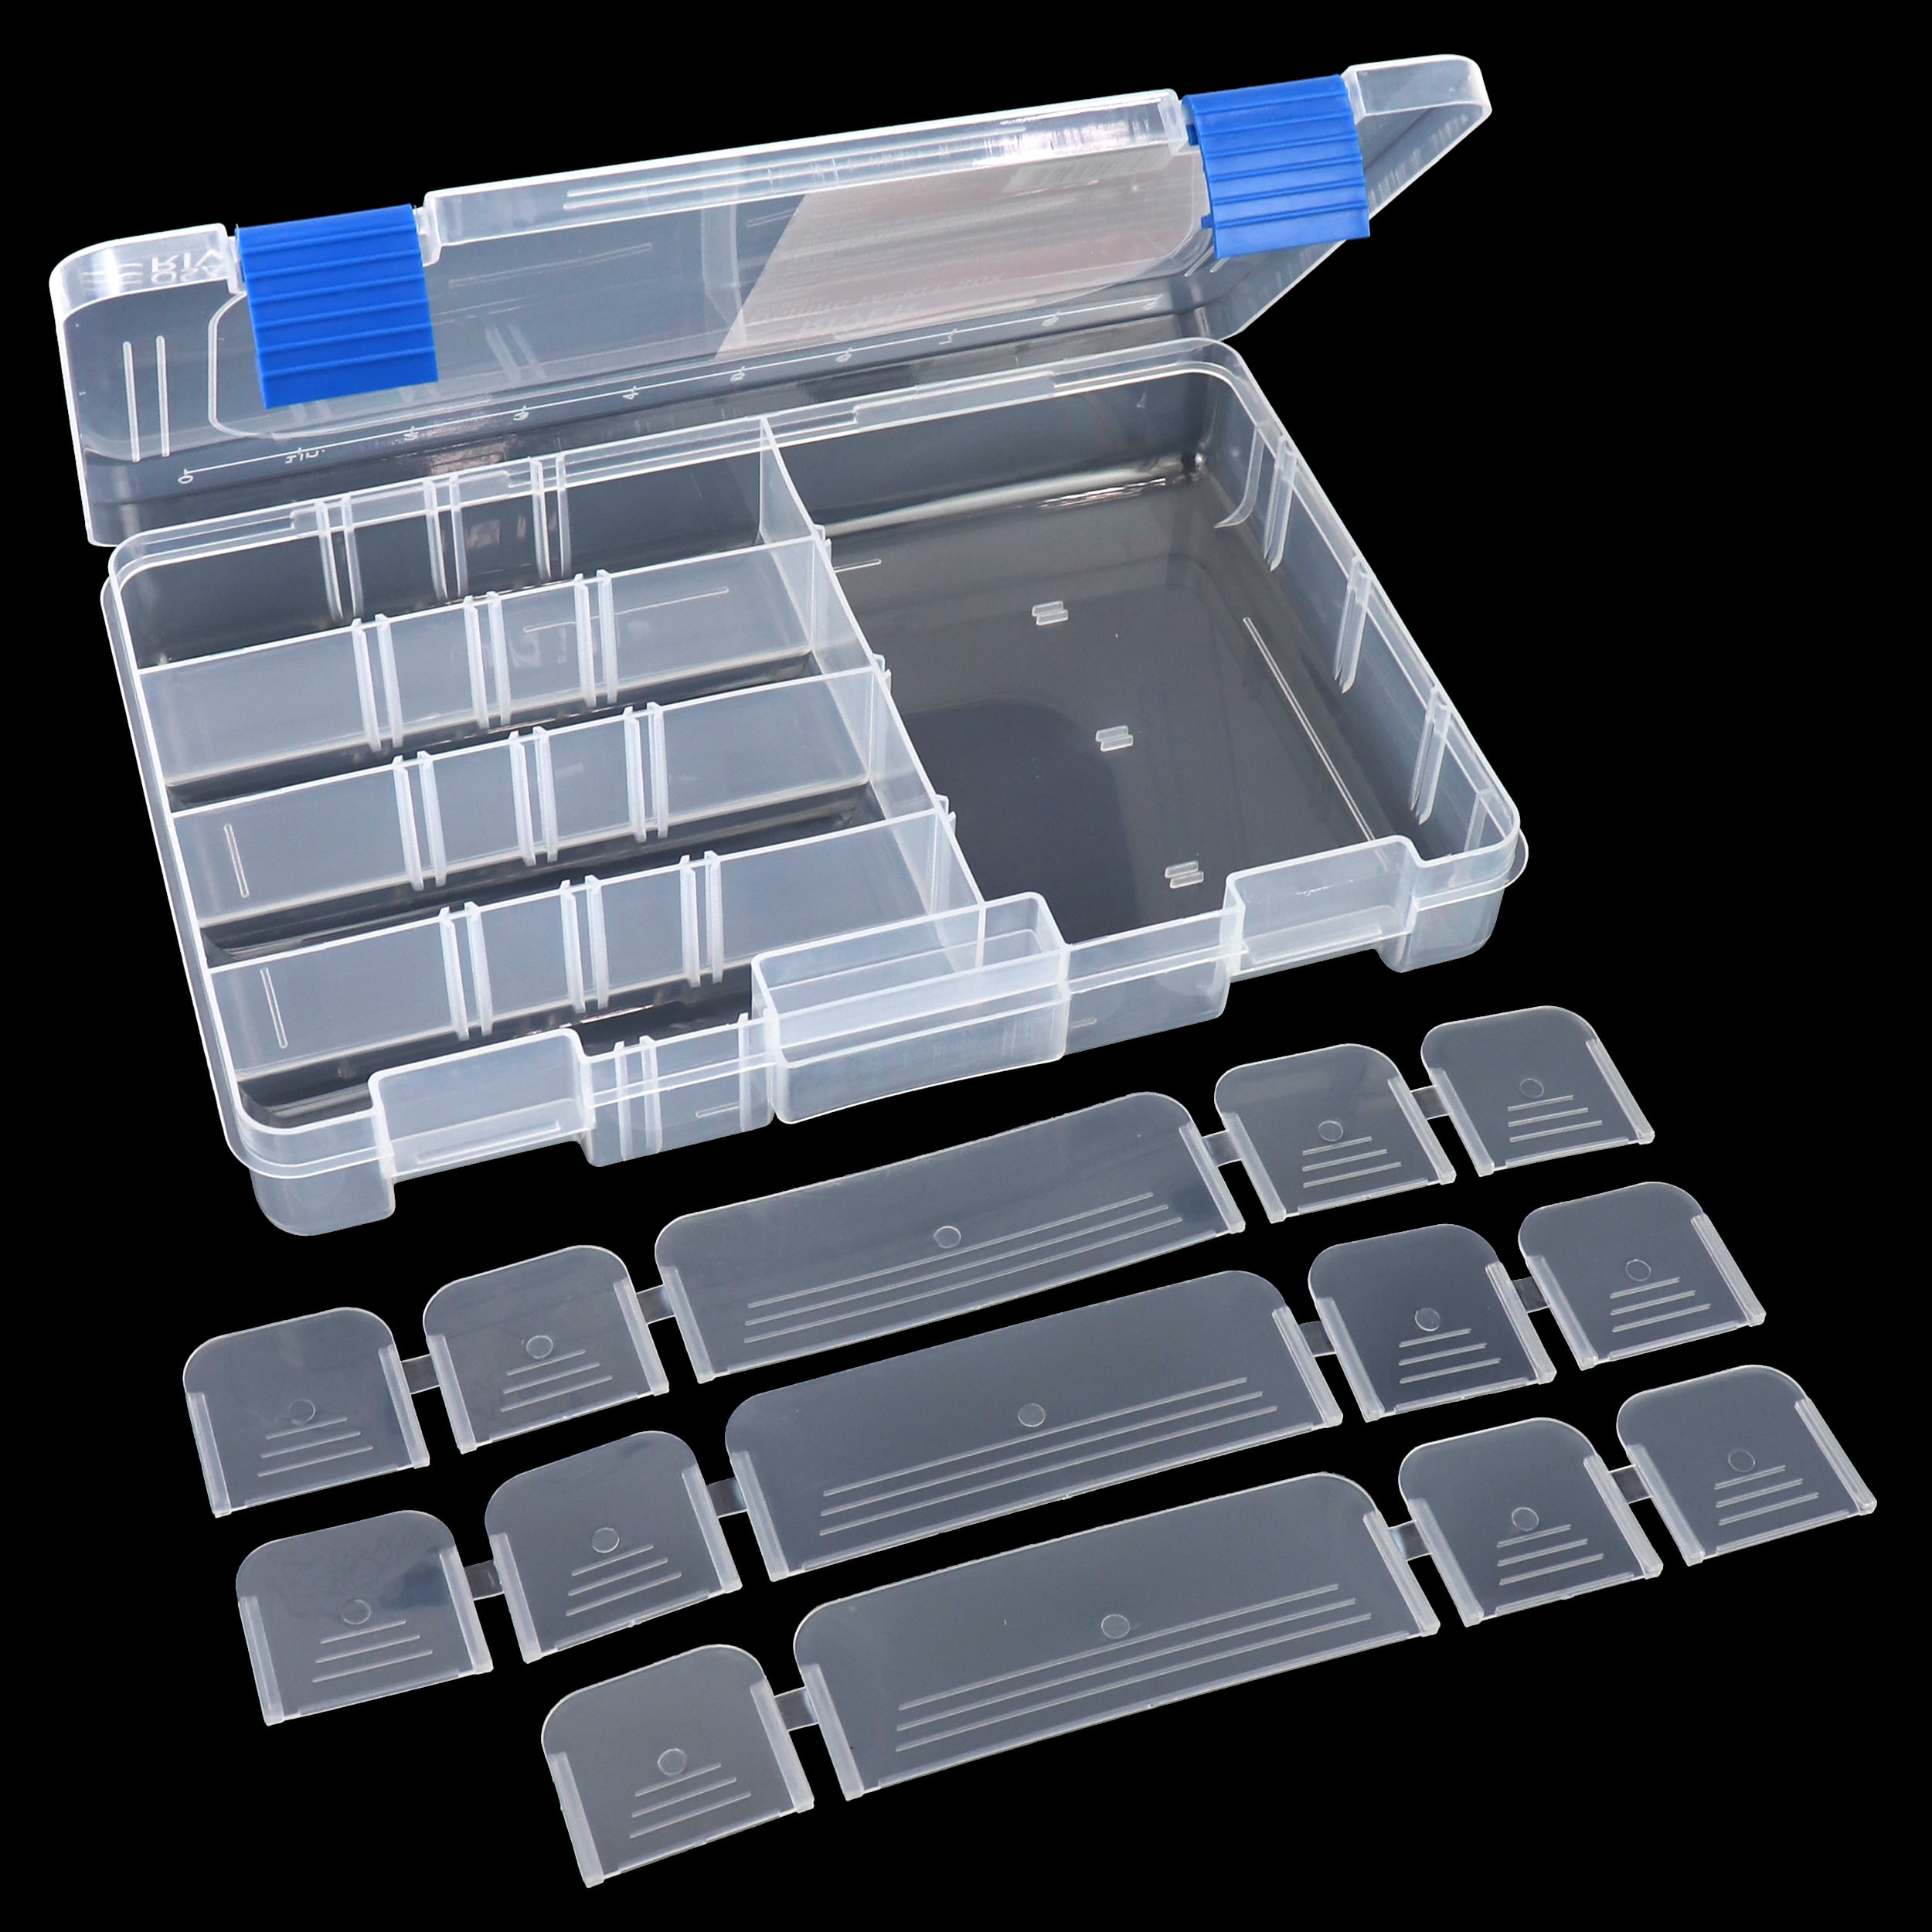 Osage River Medium Tackle Box Organizer, Clear Plastic Fishing Tackle Storage Tray with Adjustable Dividers, 1 Pack